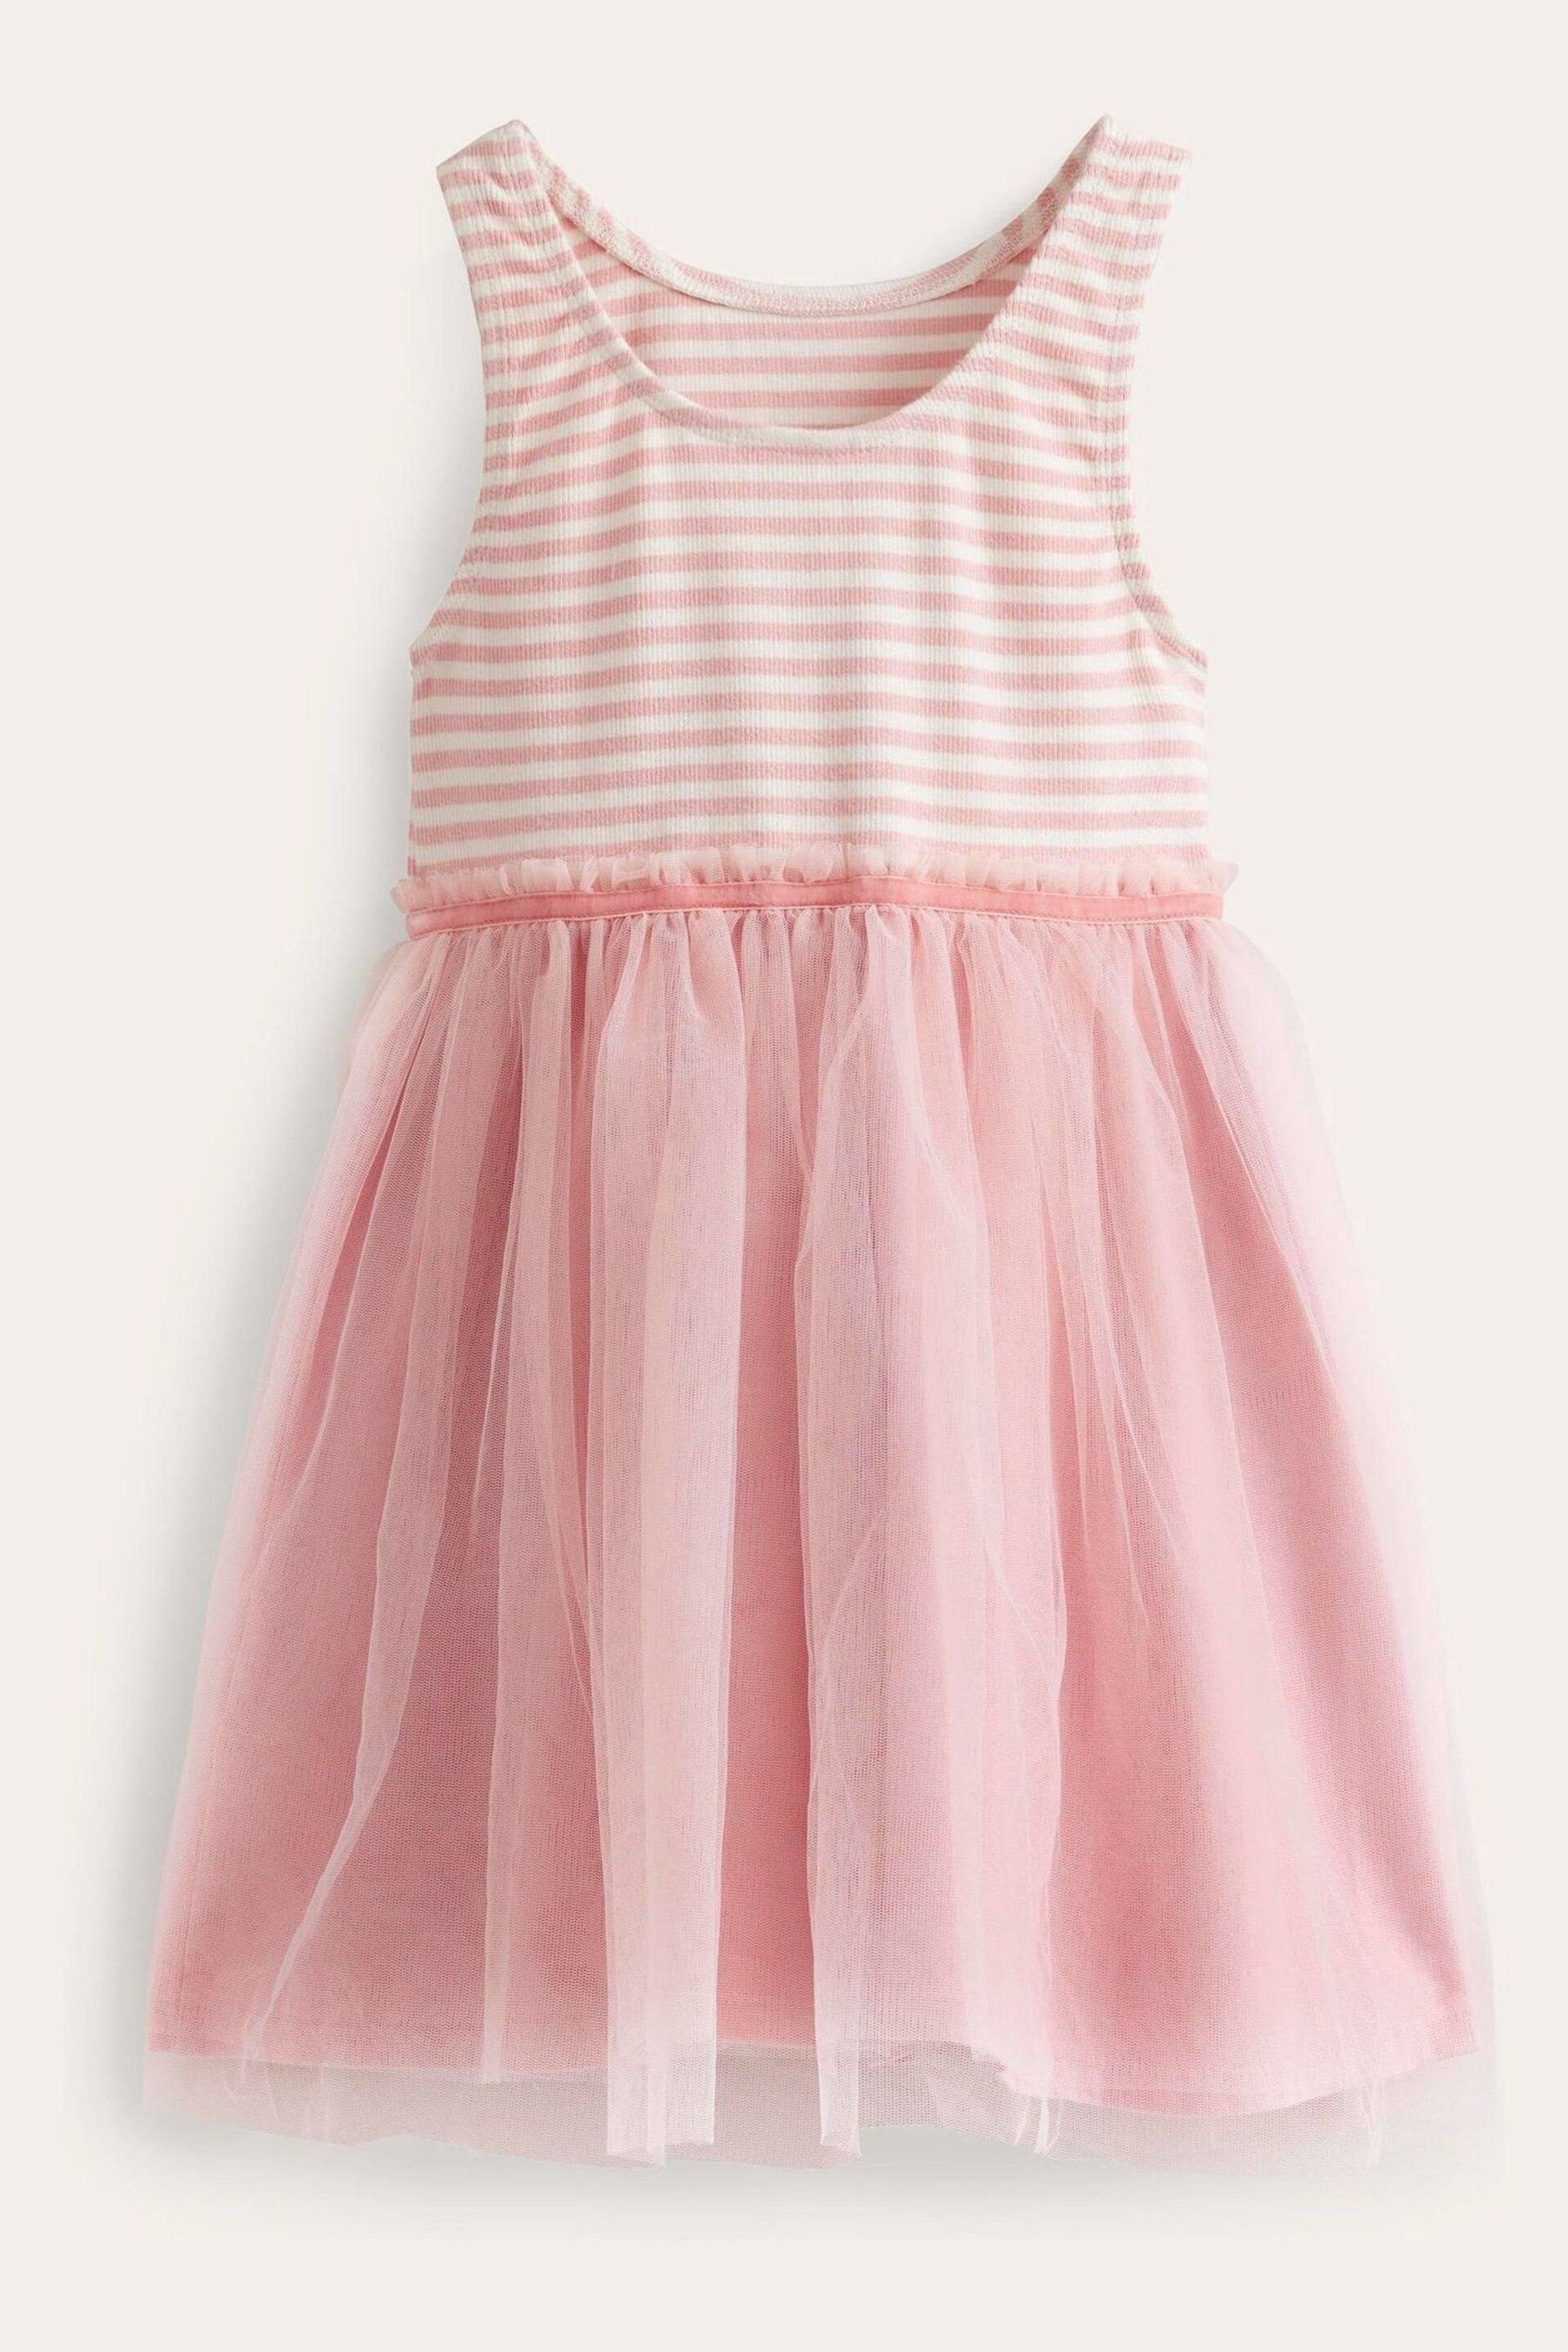 Boden Pink Jersey Tulle Mix Dress - Image 1 of 3